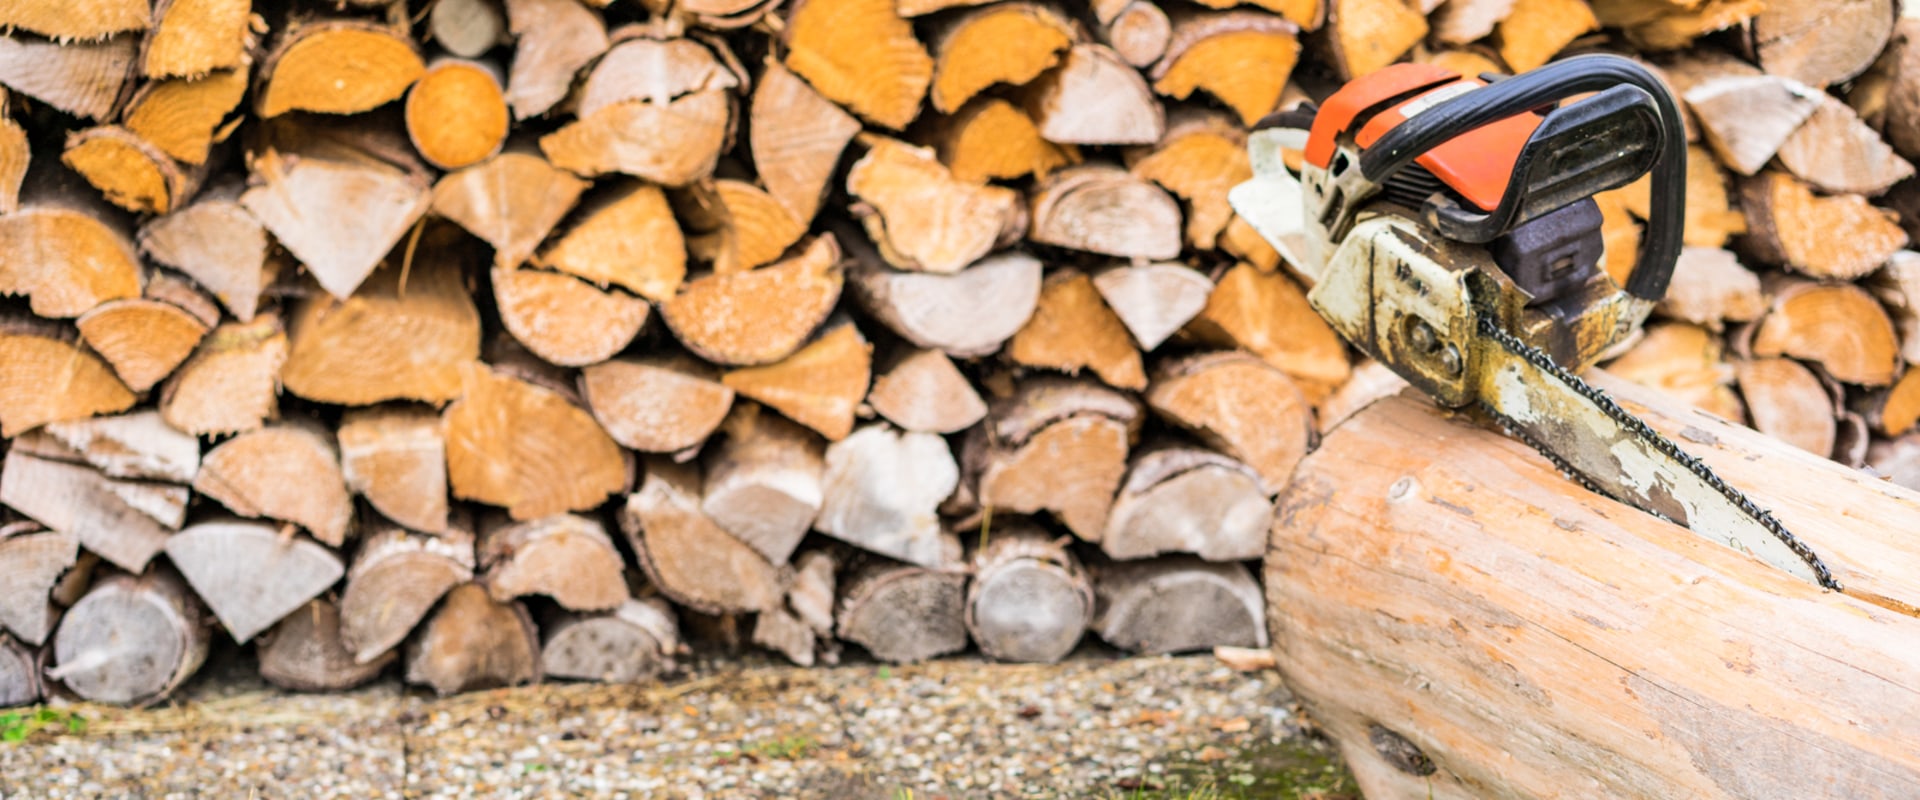 Stump Grinding Services In MS: What You Should Know